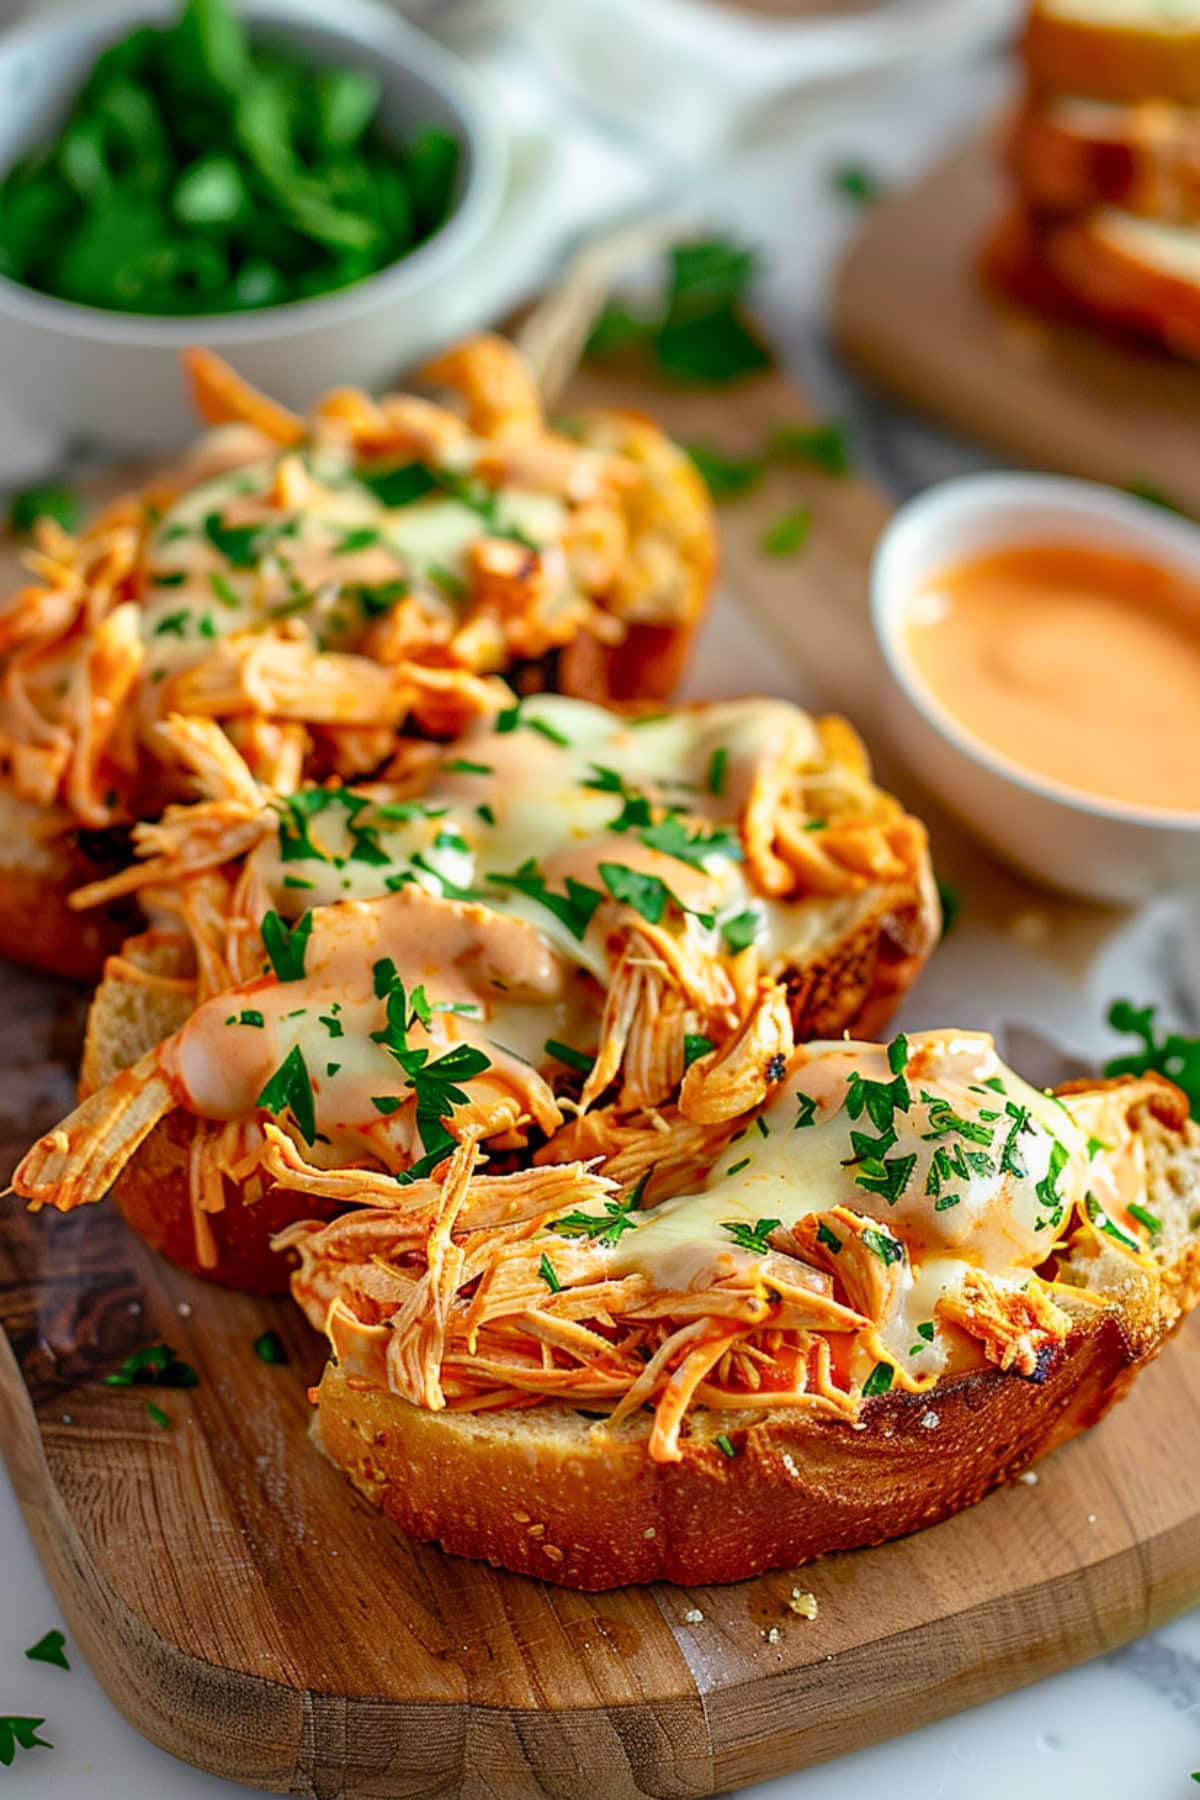 Thick slices of loaf bread with shredded chicken in buffalo sauce and melty cheese on top.